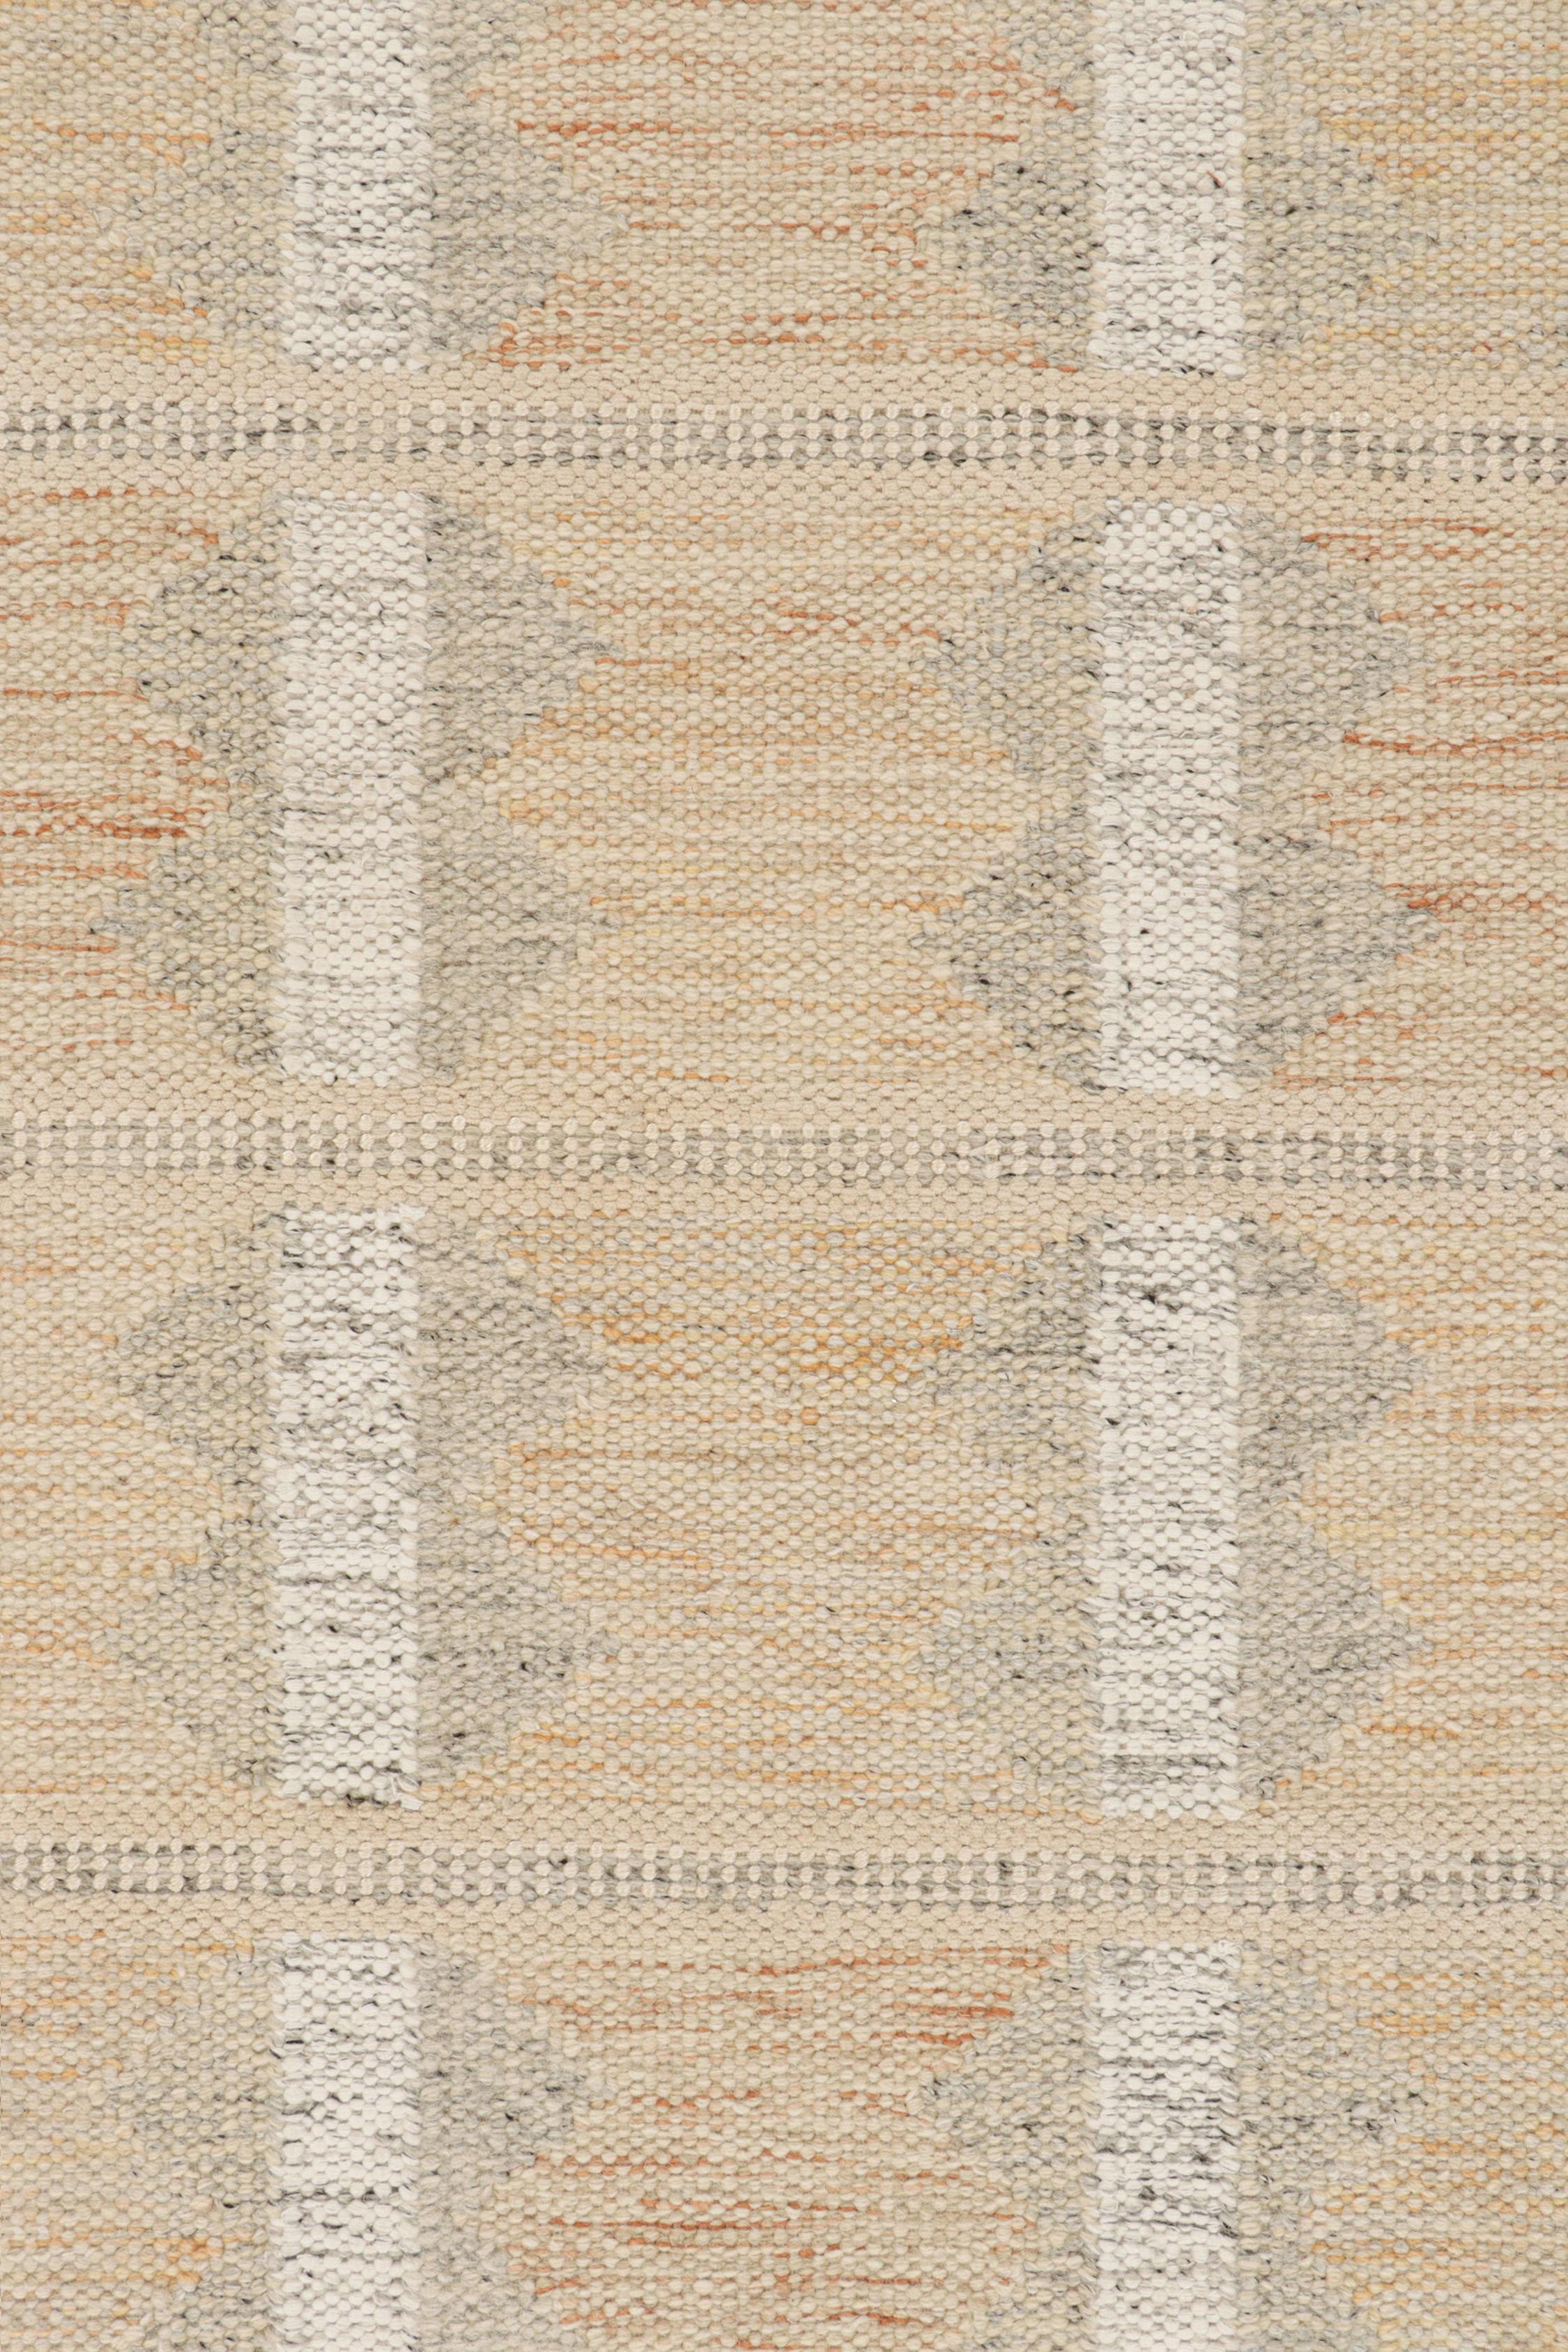 Rug & Kilim’s Scandinavian Style Kilim in Ivory with Off-White Geometric Pattern In New Condition For Sale In Long Island City, NY